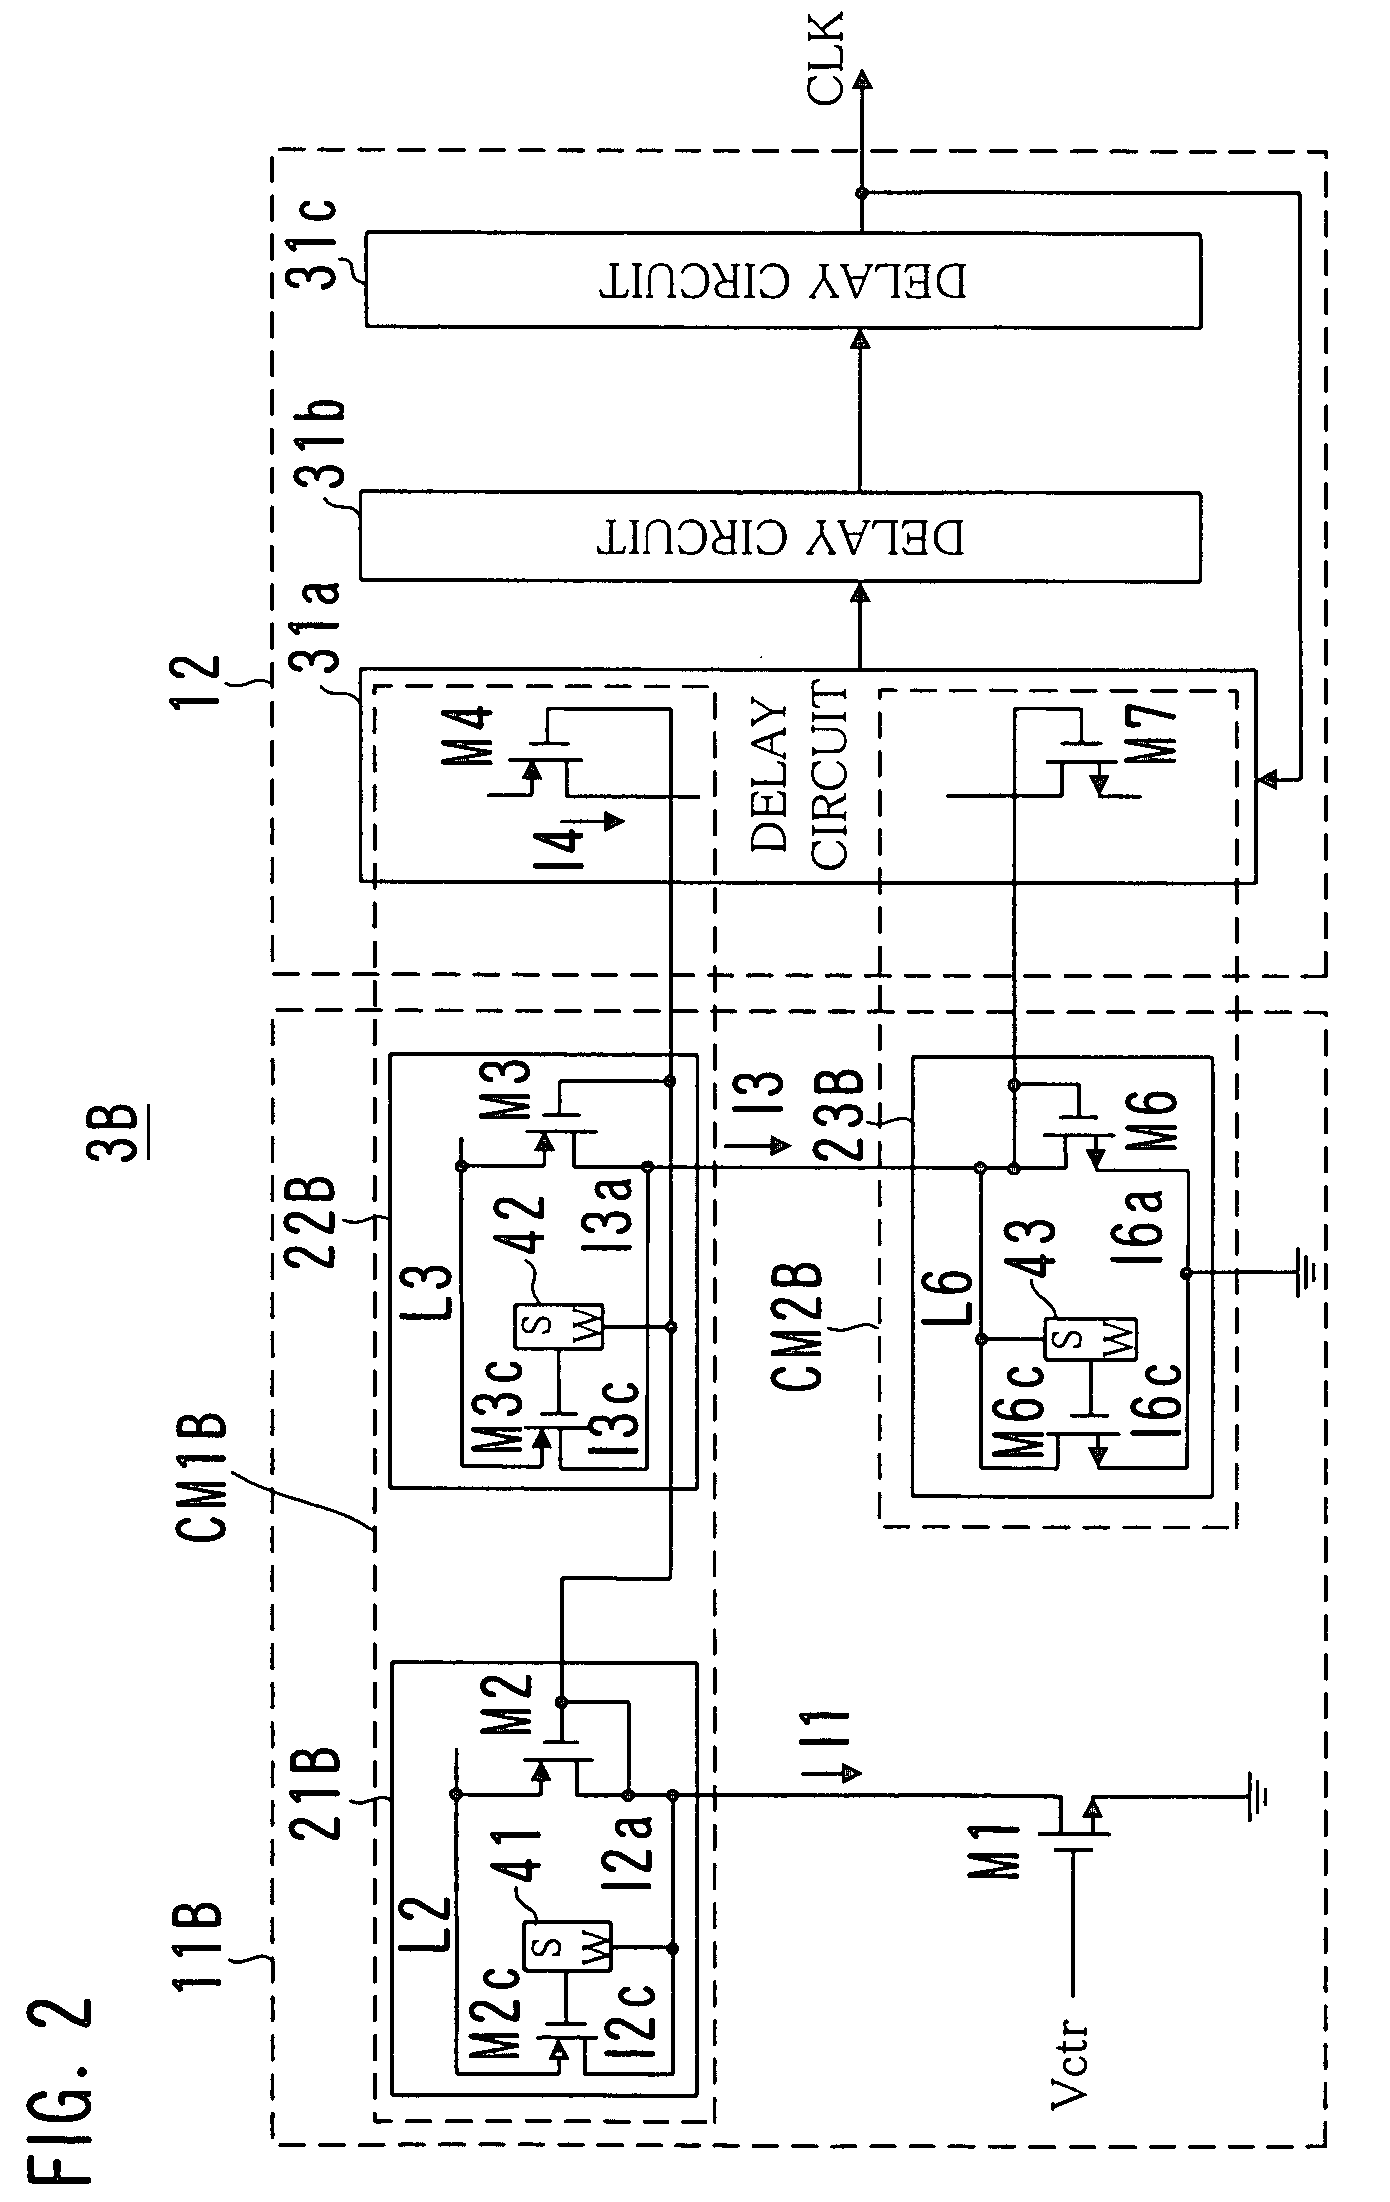 Voltage controlled oscillator circuit with different sized shunt transistors